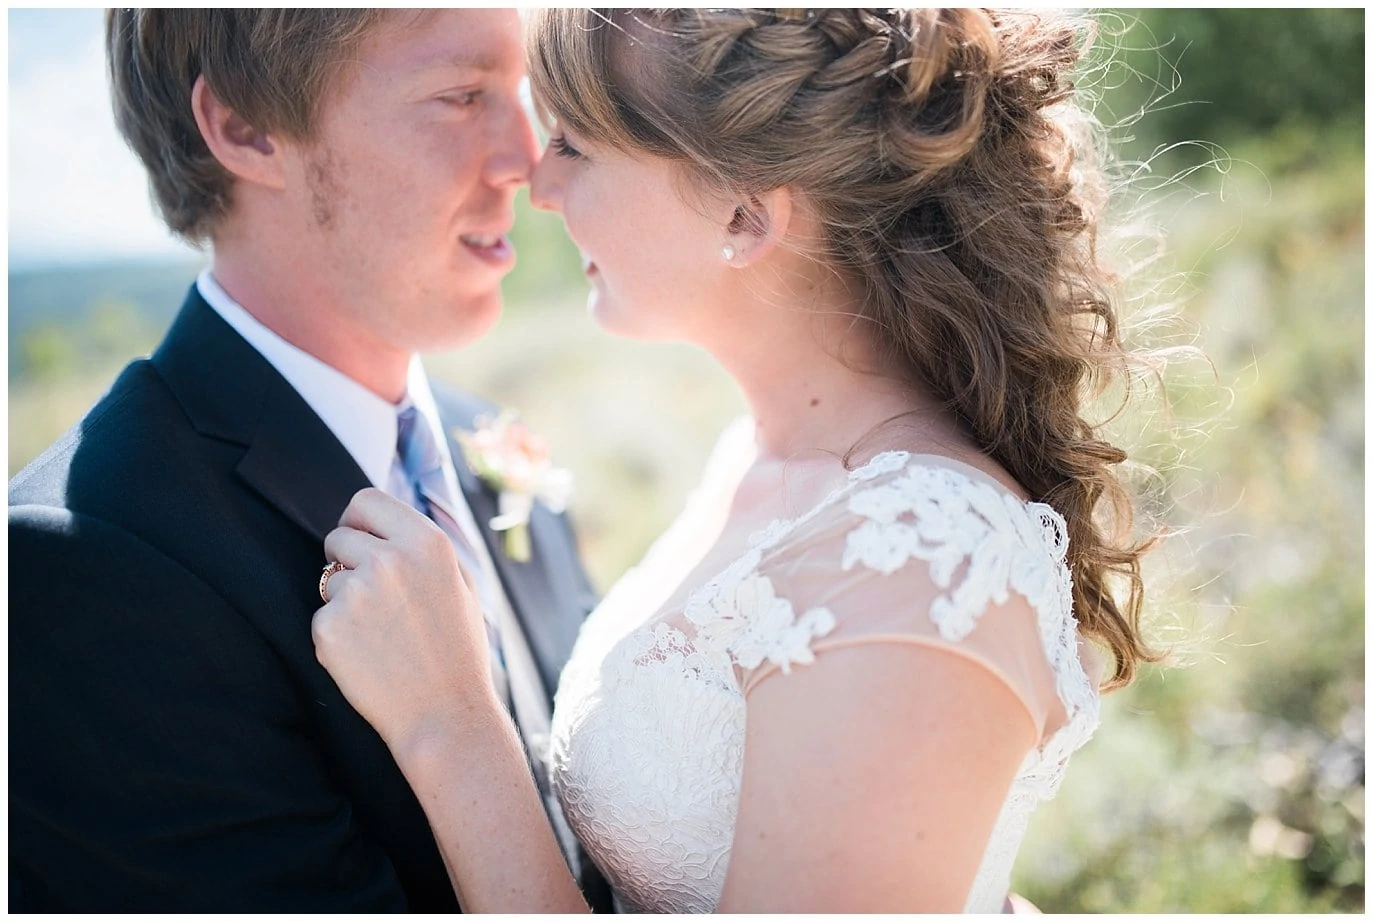 intimate portrait of bride and groom on wedding day photo